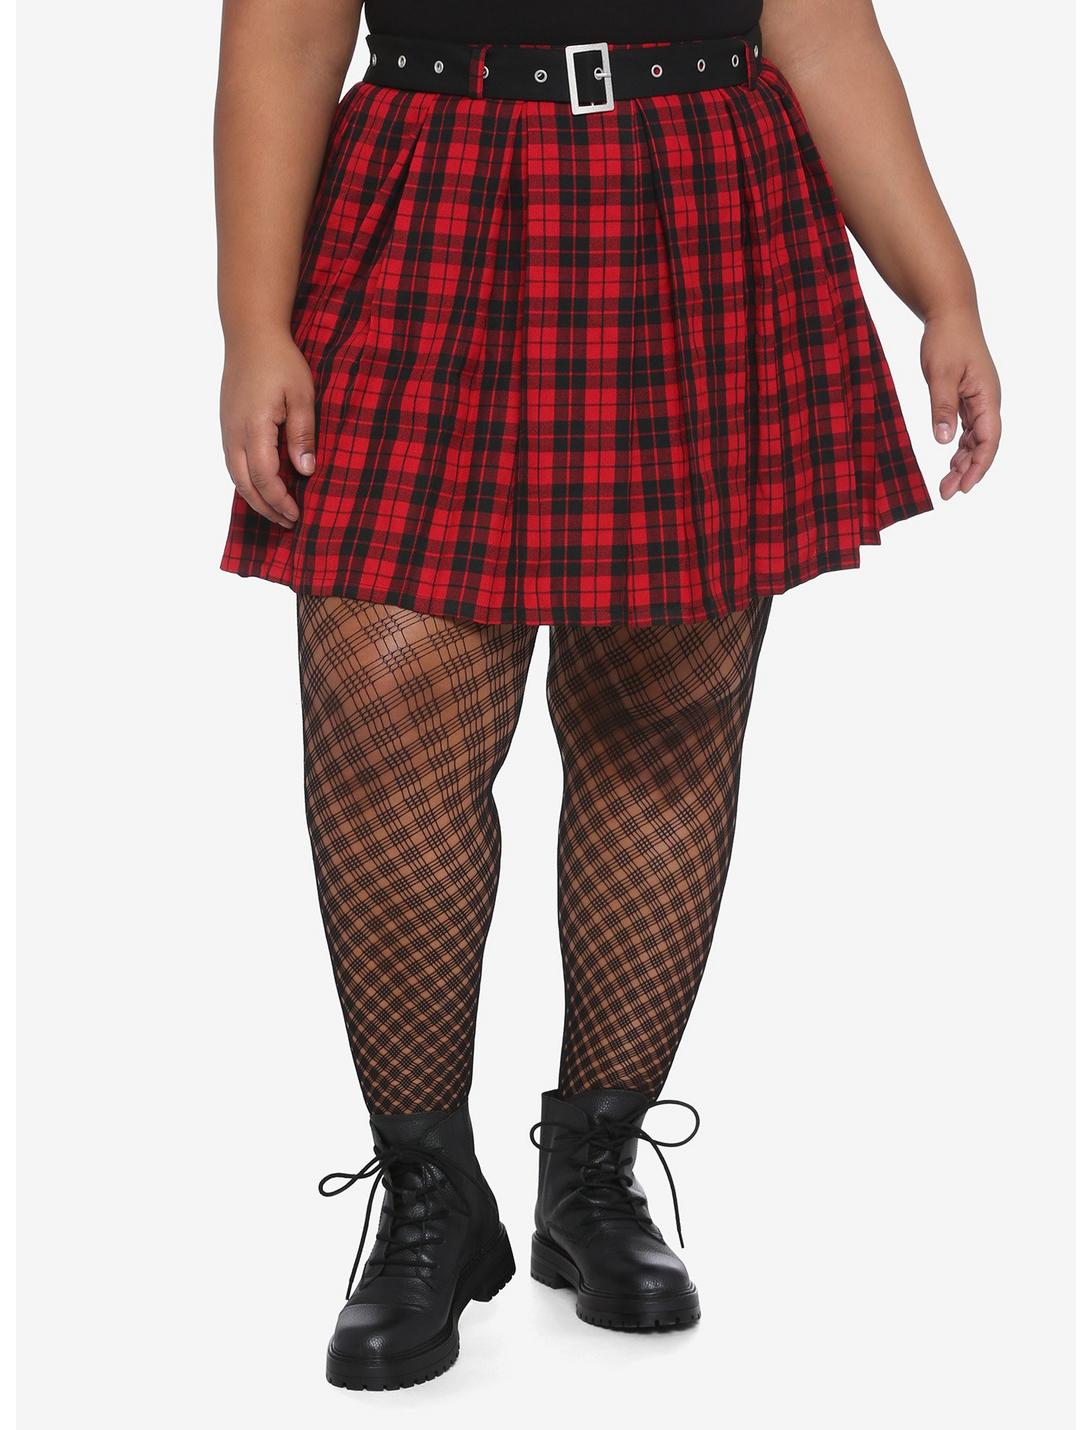 Red & Black Pleated Skirt With Grommet Belt Plus Size | Hot Topic